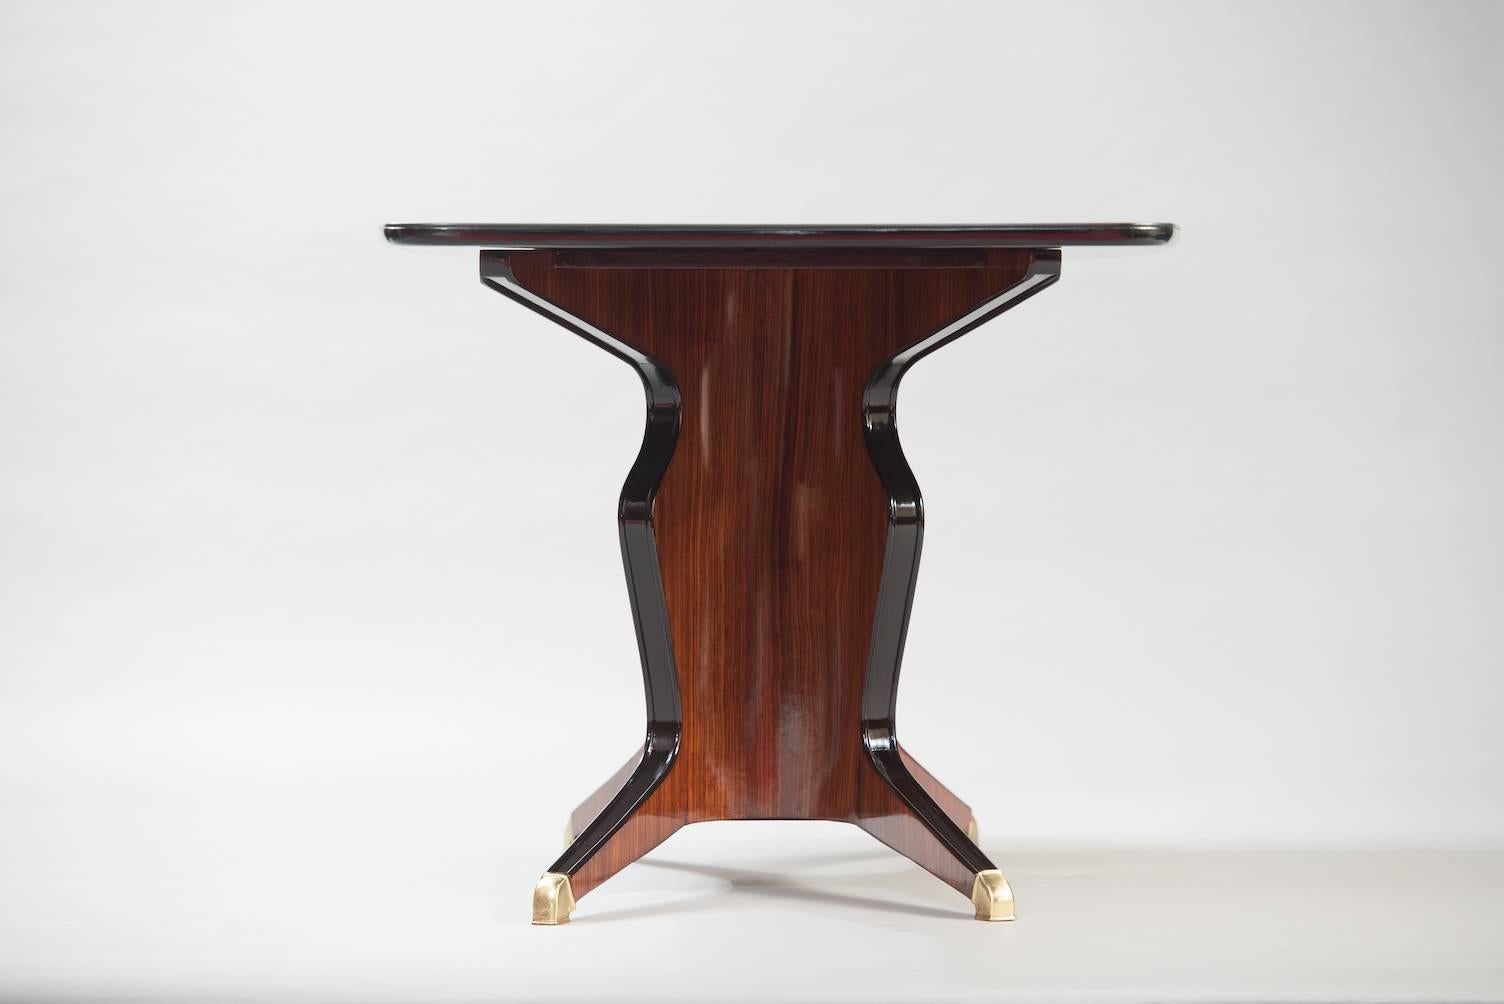 Osvaldo Borsani rosewood and brass midcentury dining table, black lacquered glass on top, manufactured by Fossati, Attilio & Arturo.